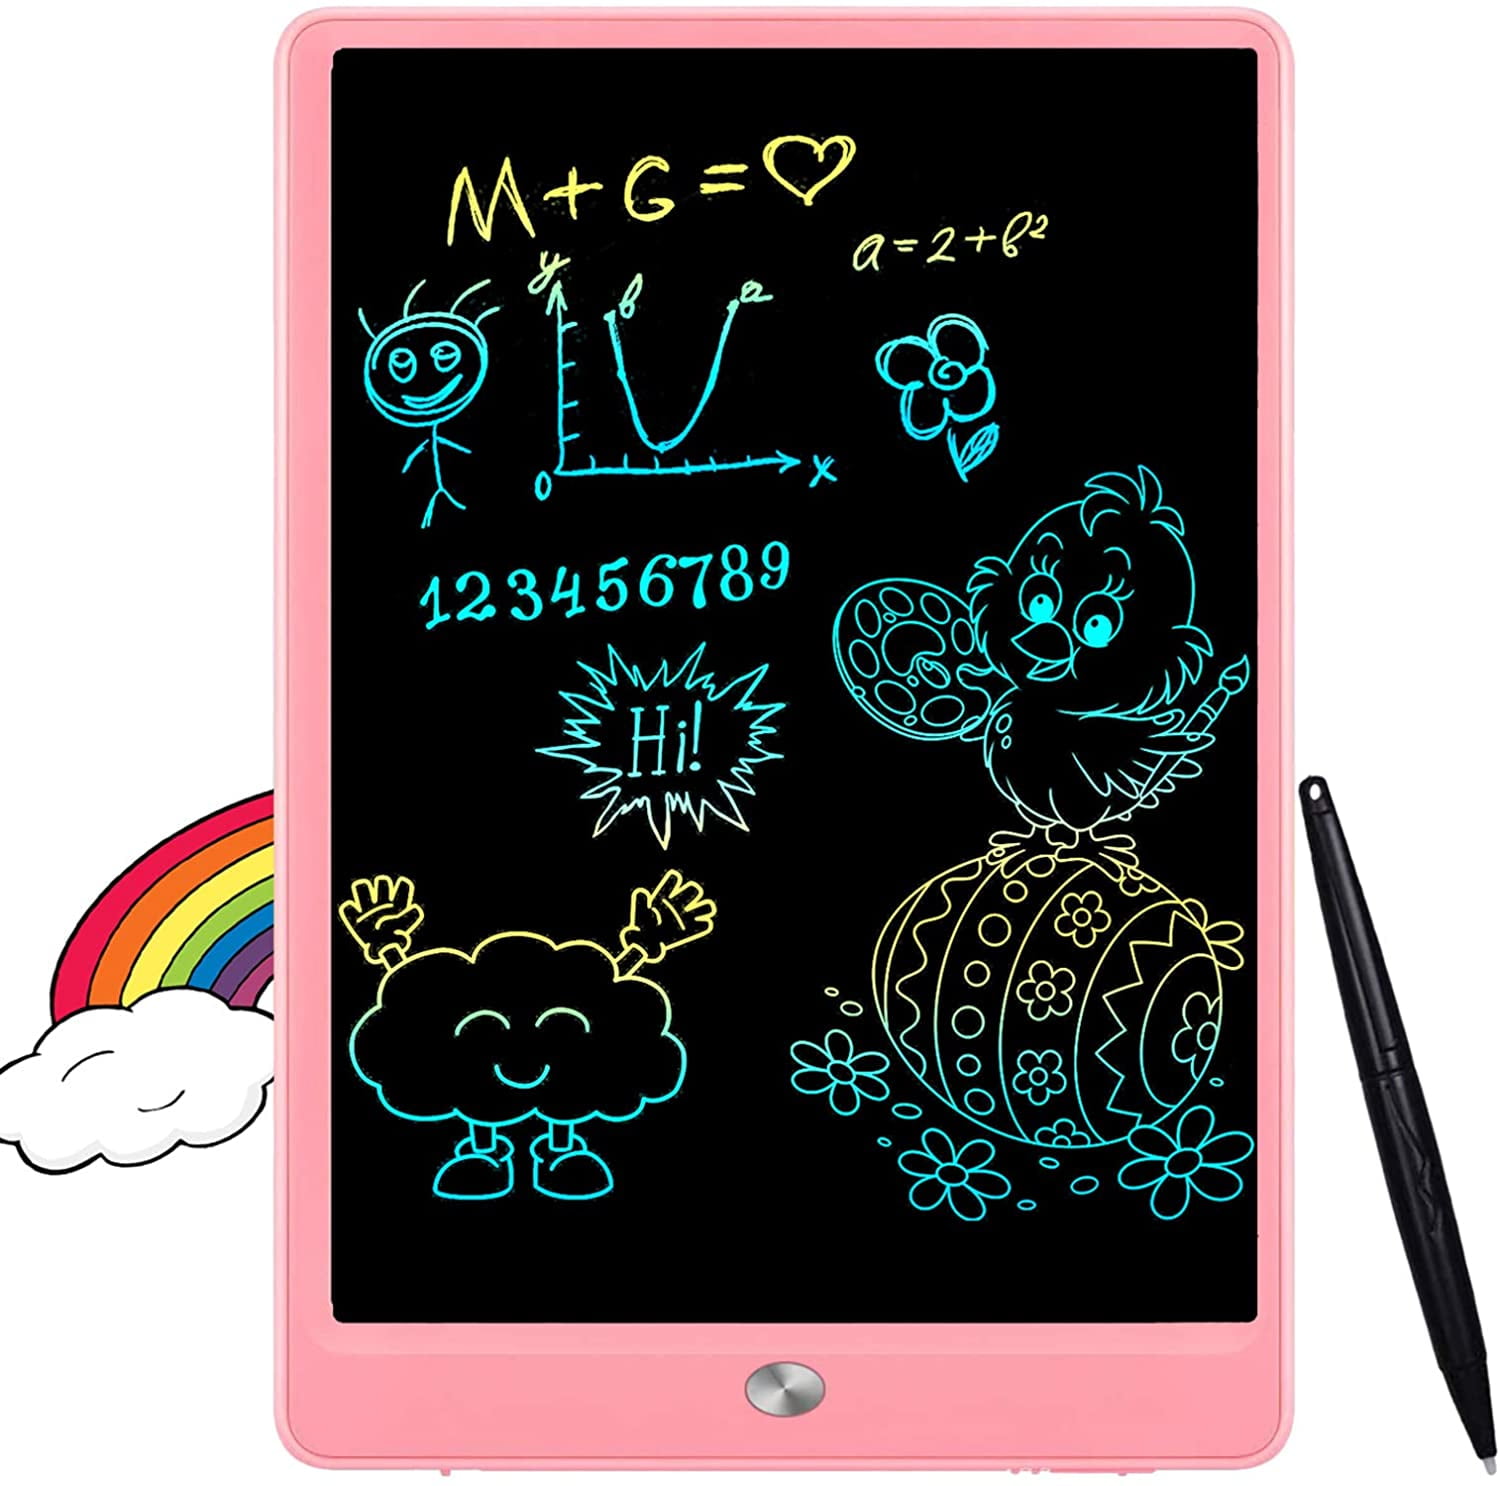 GUYUCOM 8.5-Inch LCD Writing Tablet Colorful Screen Doodle Board Electronic Digital Drawing Pad with Lock Button for Kids Adults 